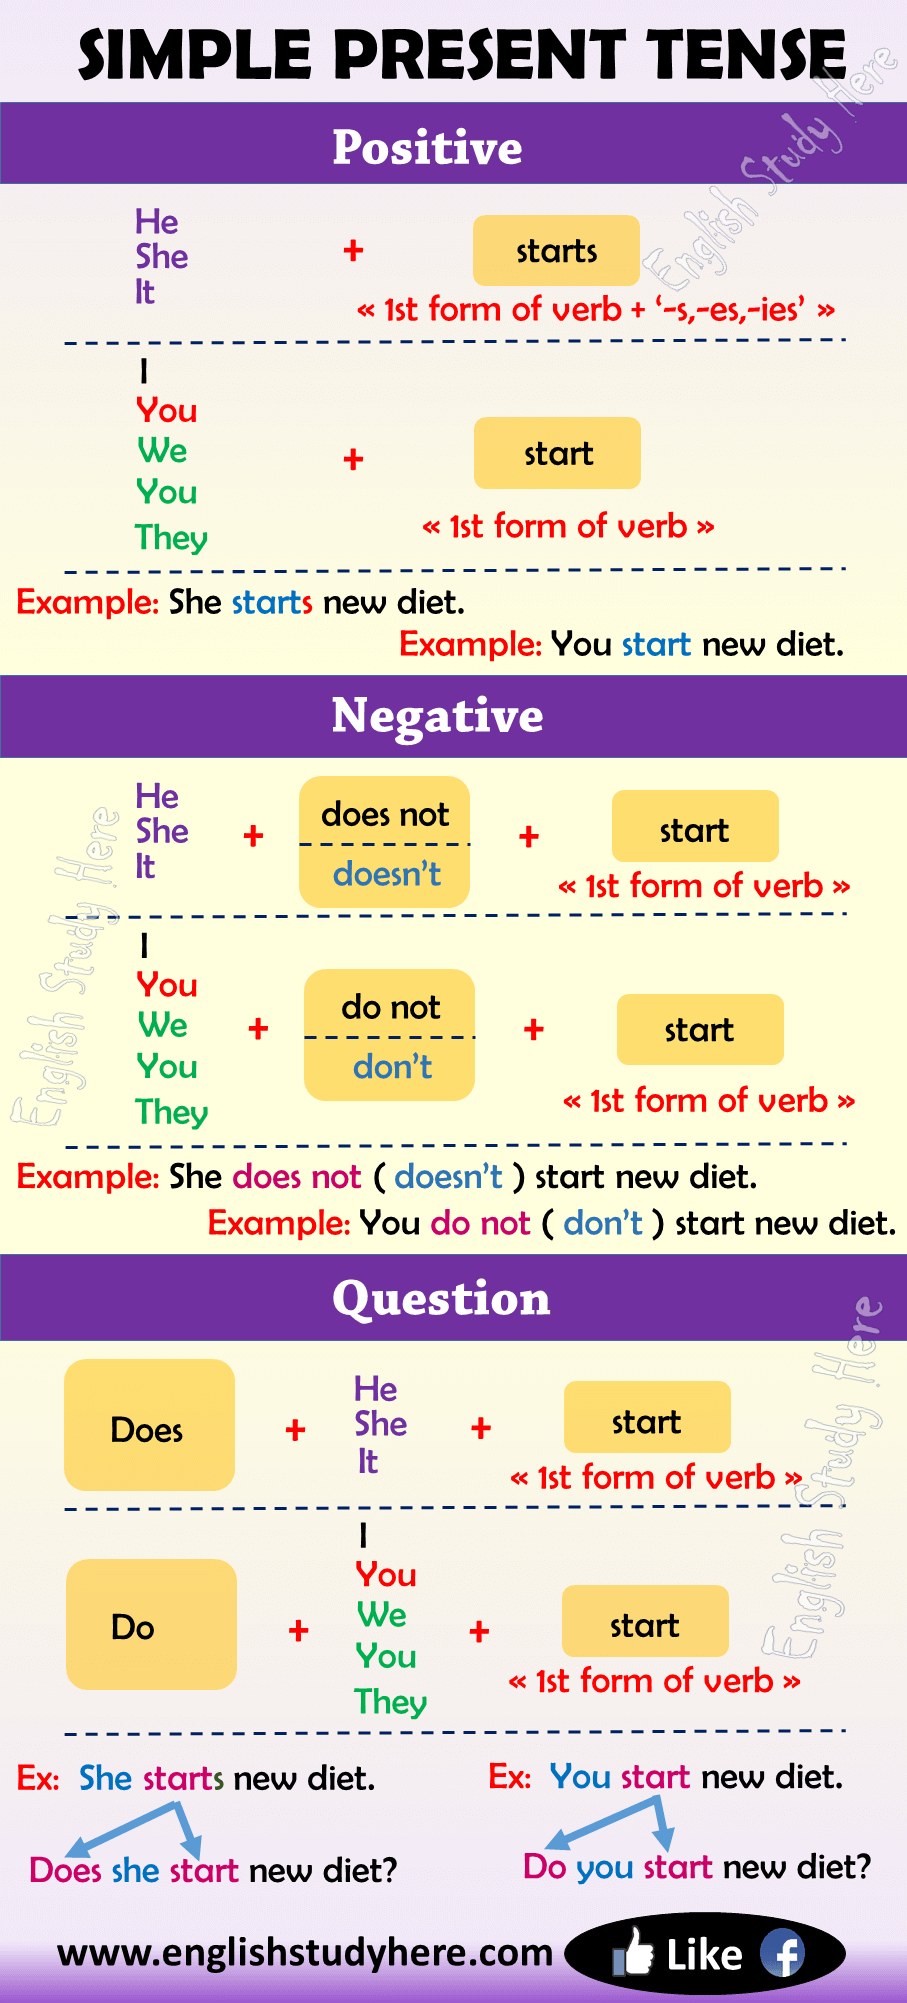 simple-present-tense-definition-and-useful-examples-with-images